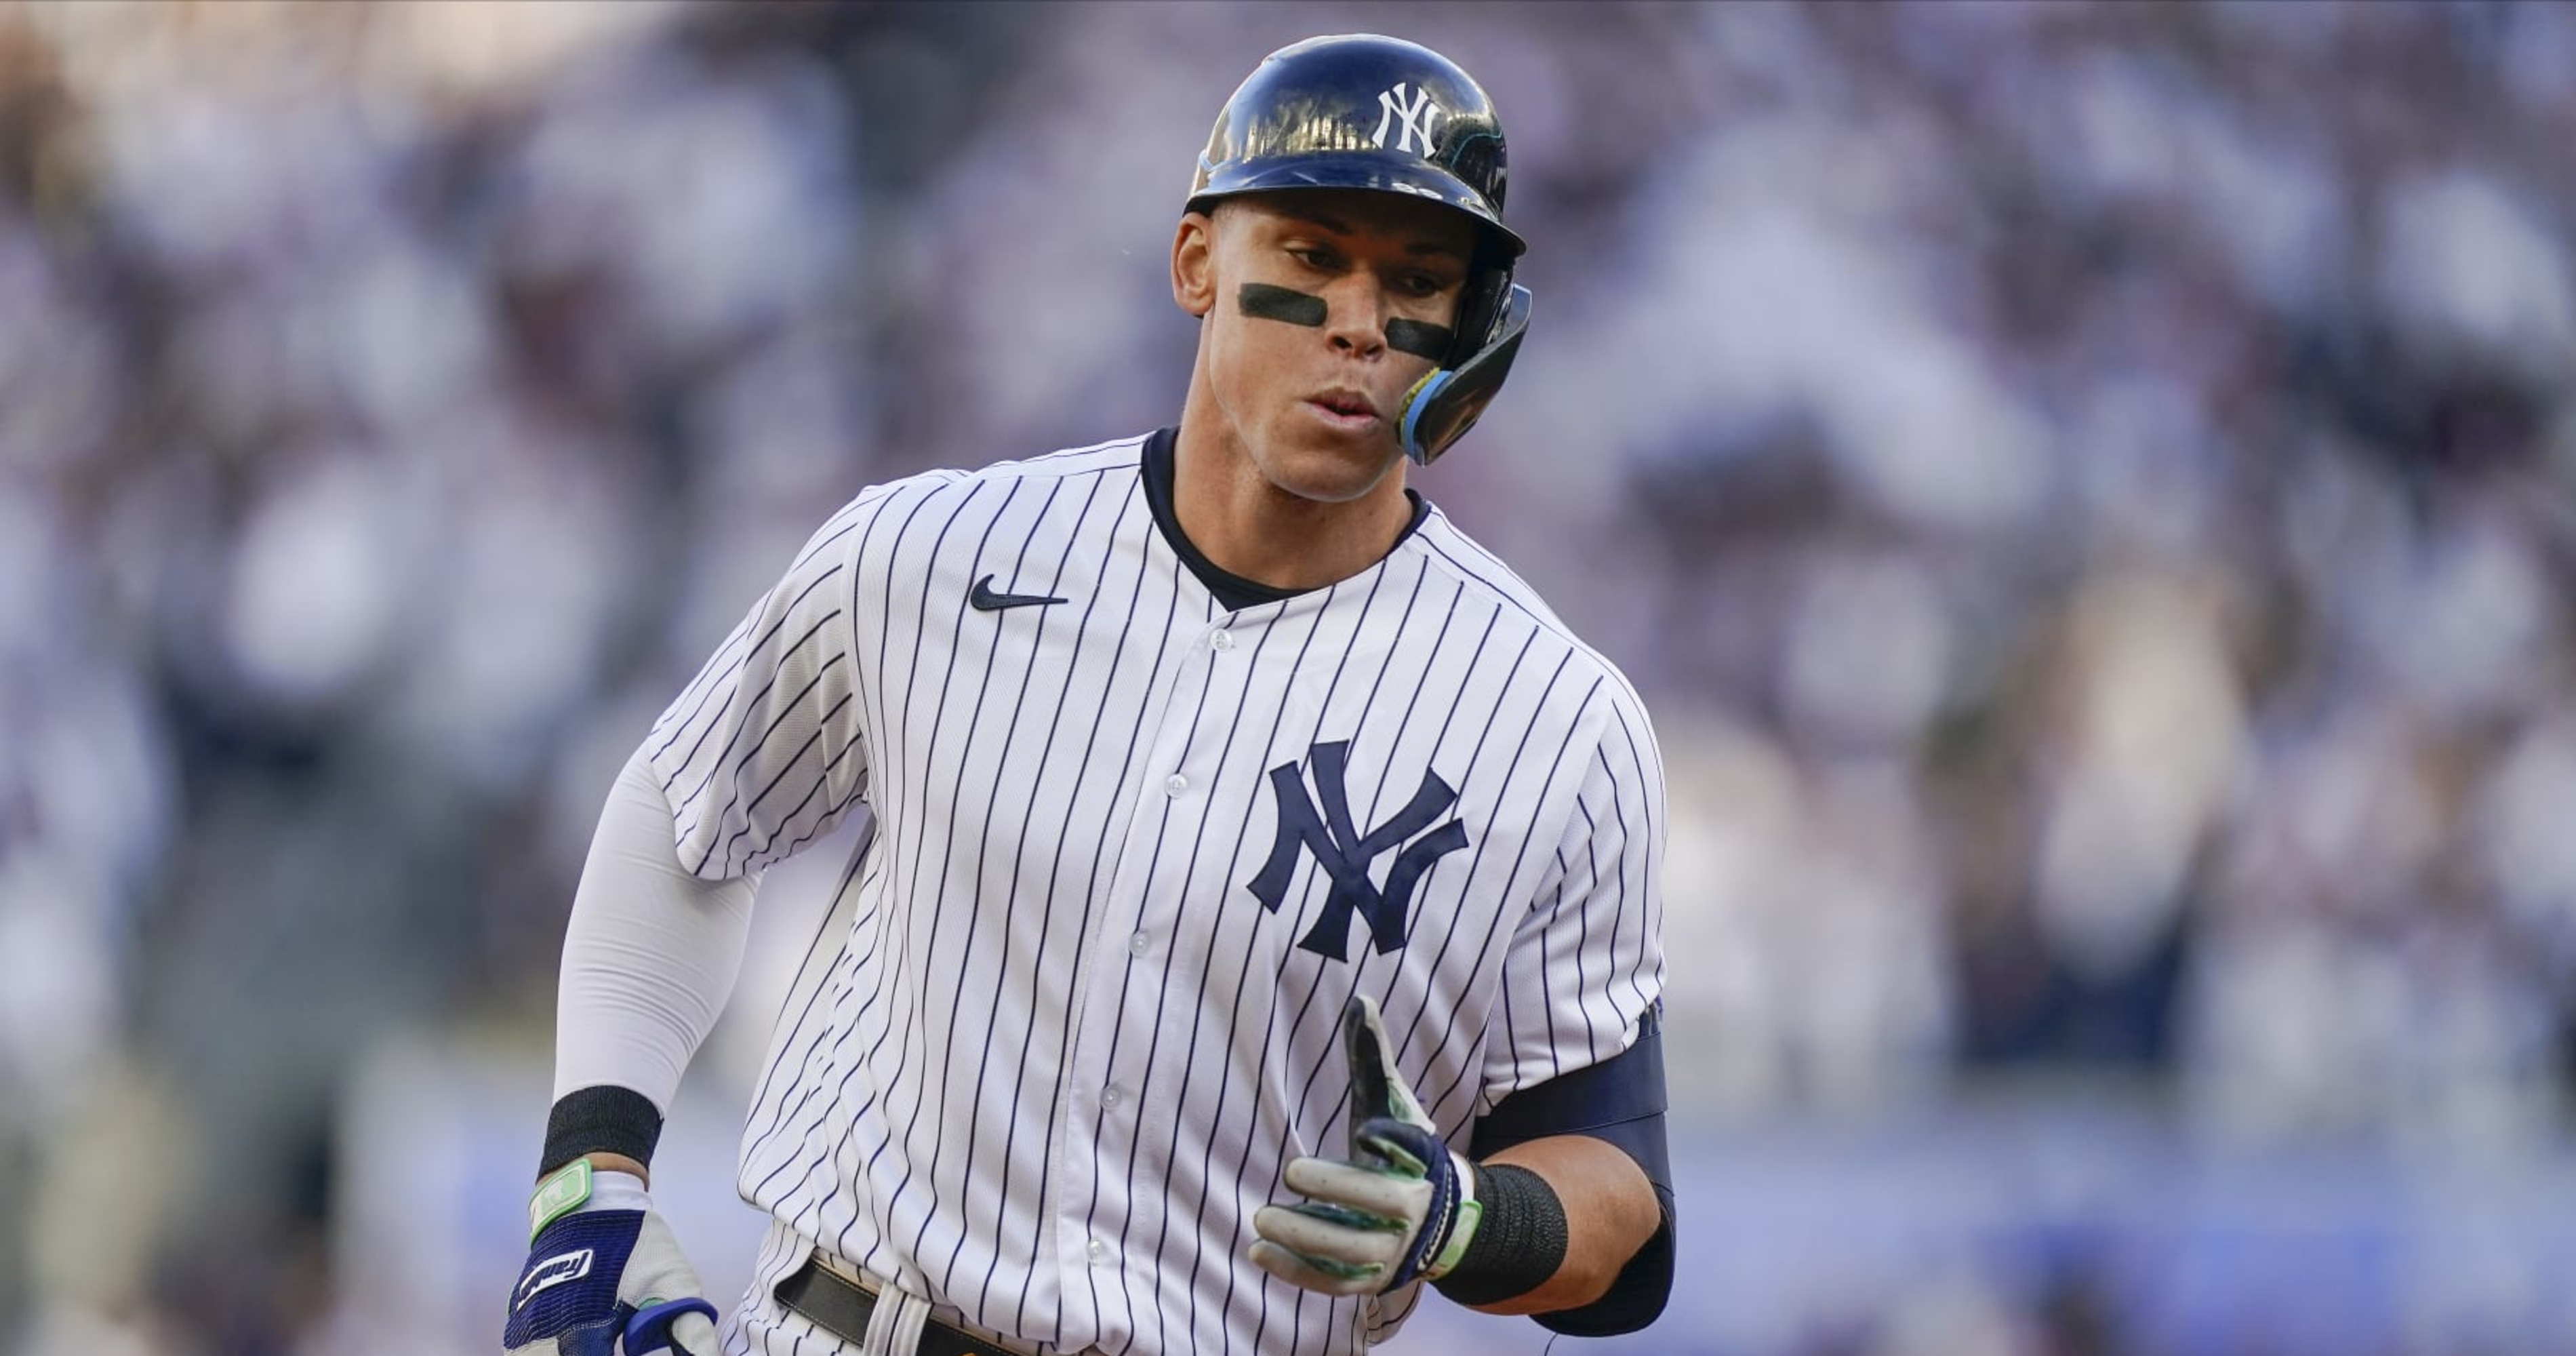 The 10 richest MLB players of 2023, ranked by net worth